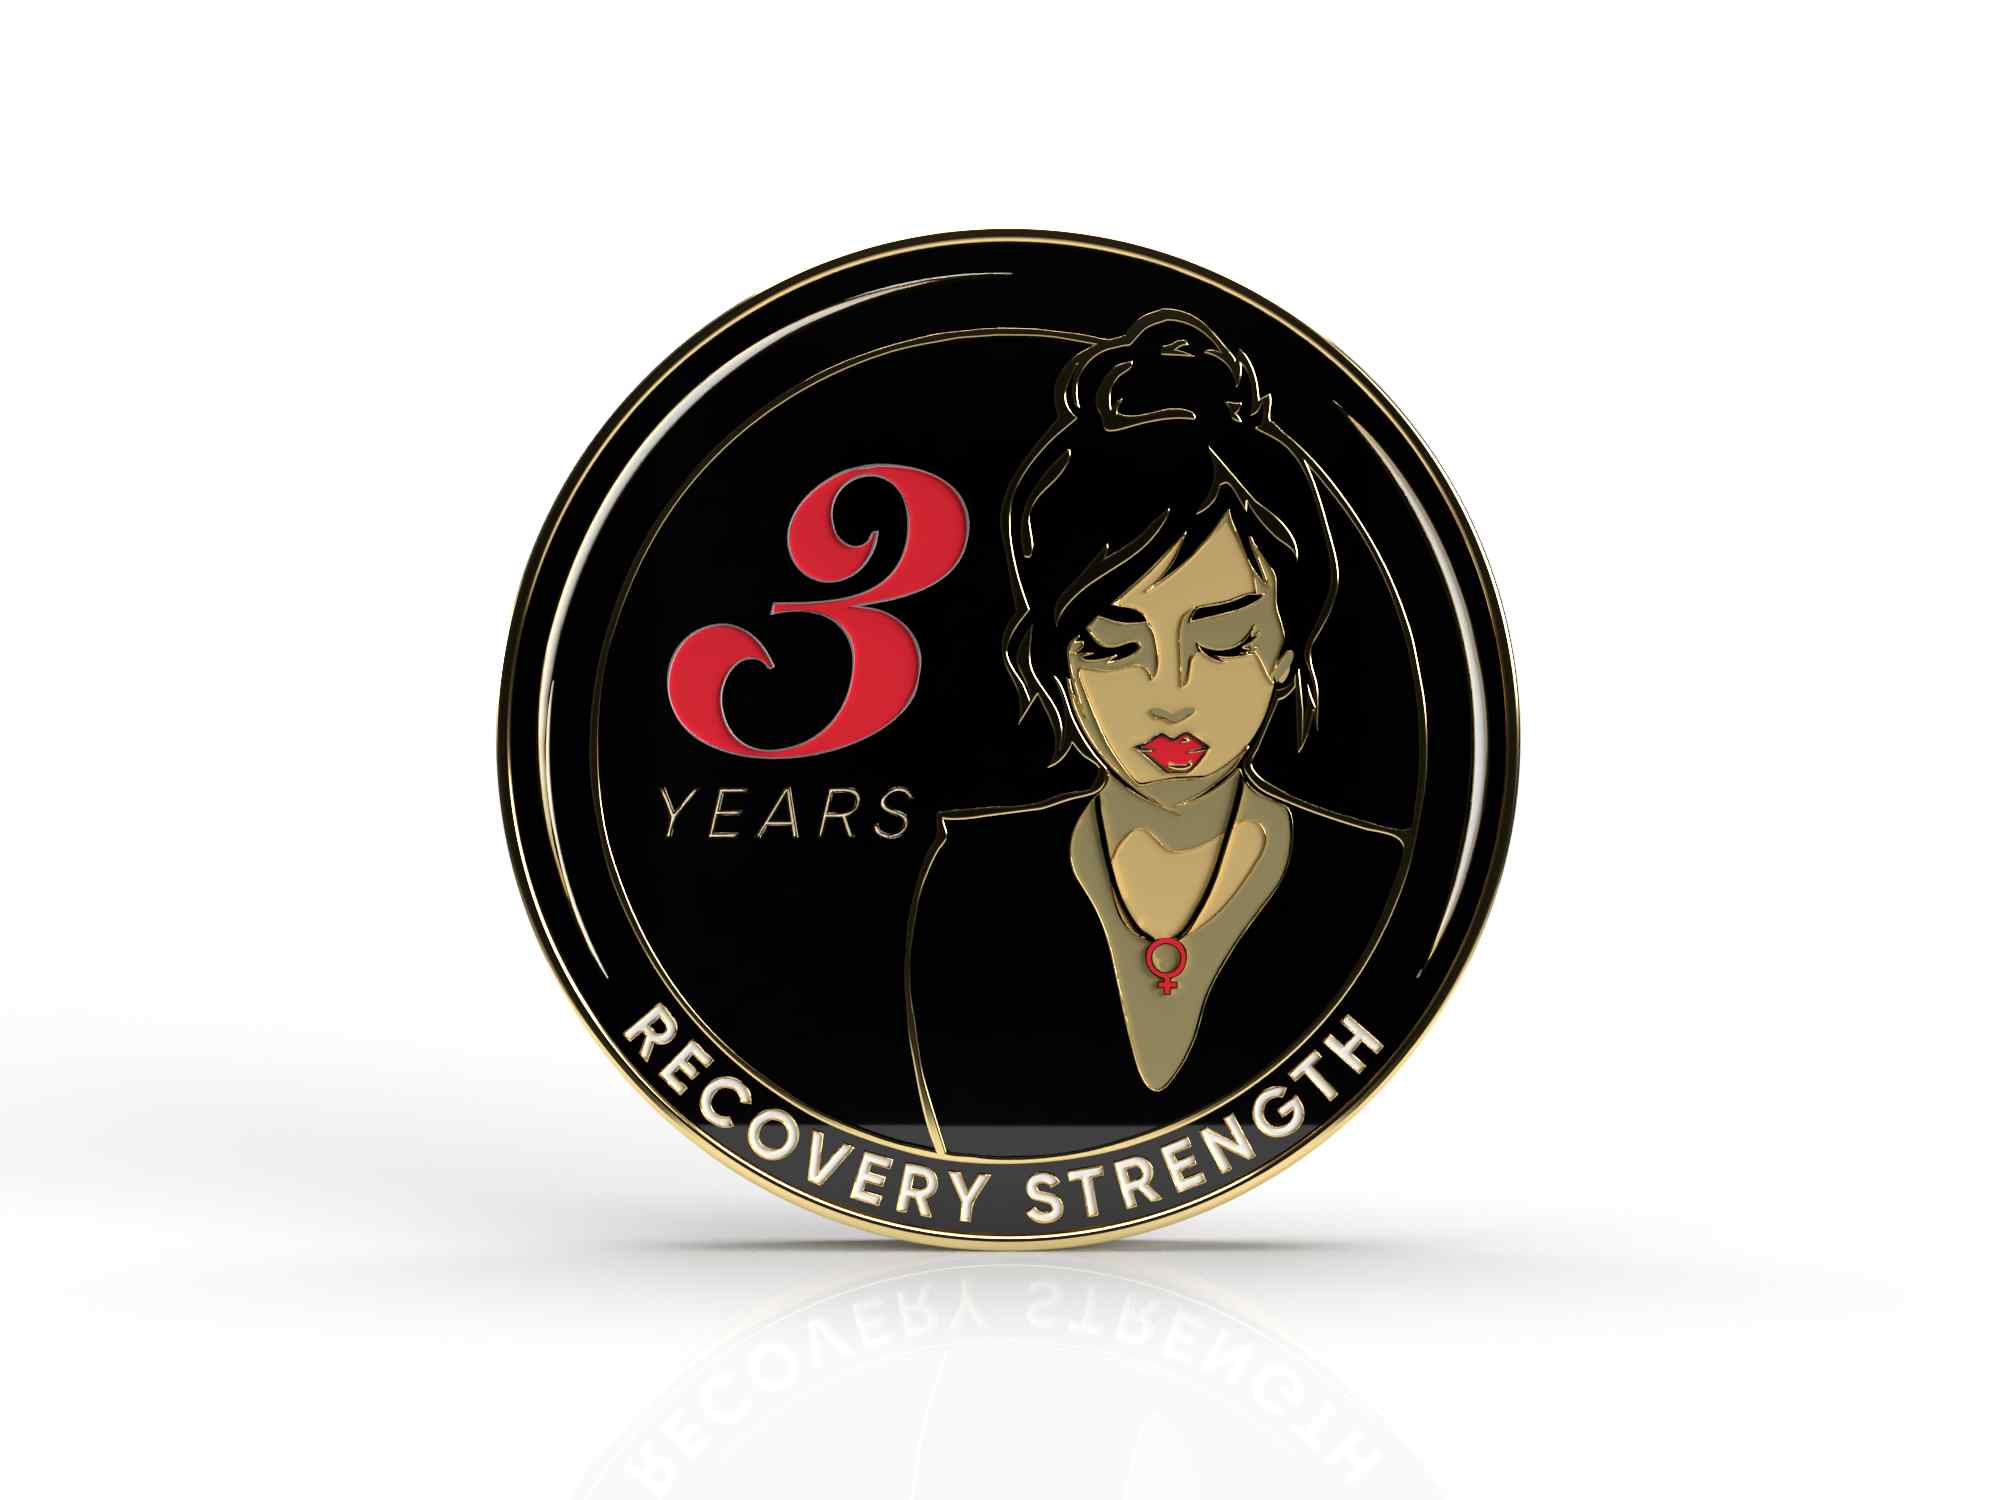 Women of Serenity AA Medallion Comes in Red Gift Box 1-50 Years